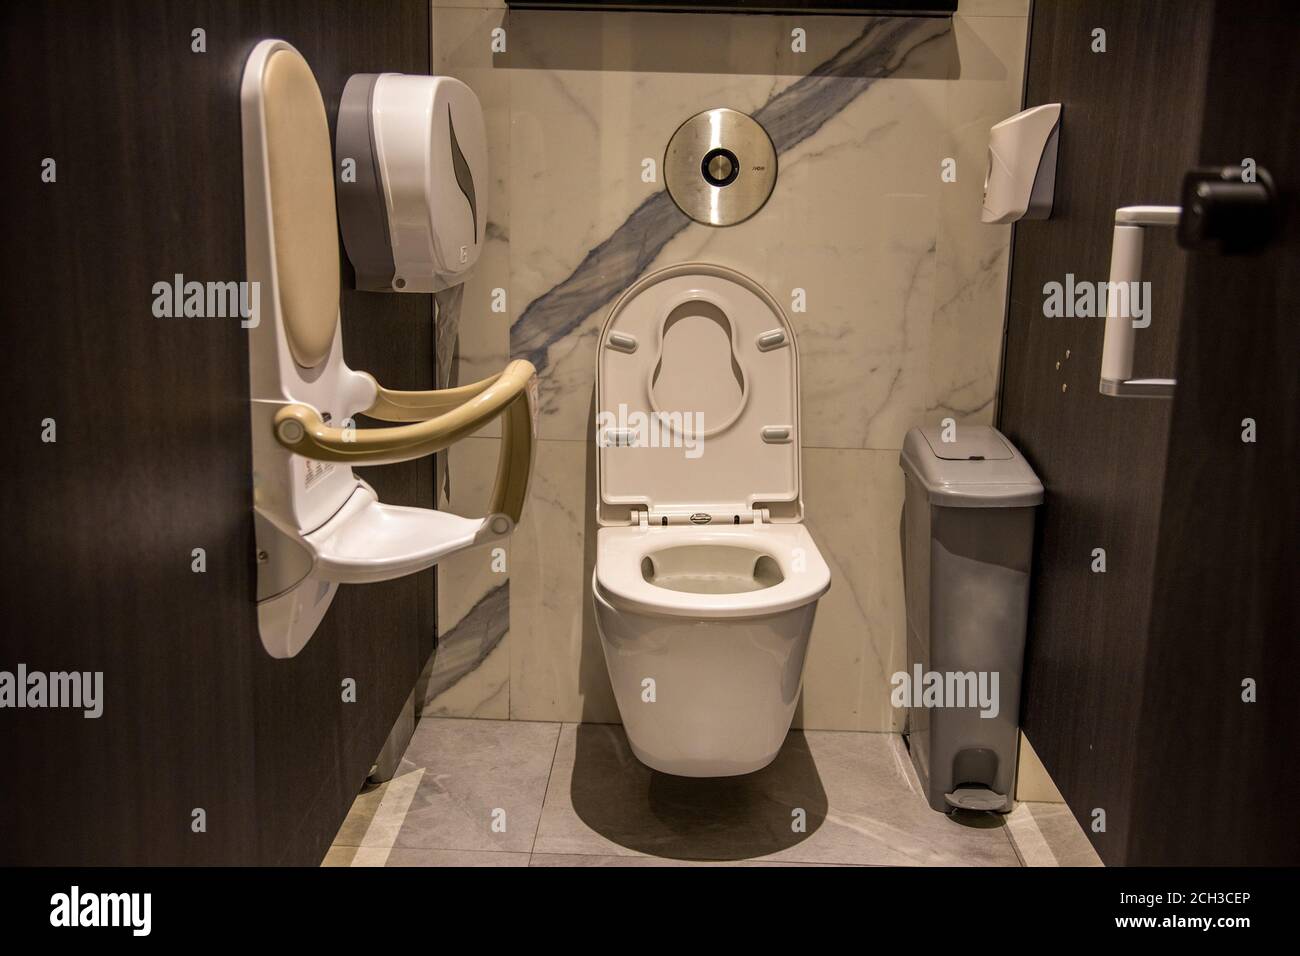 mother care publc toilet equipment. cubicle of a public toilet equipped Folding toddler safety chair mounted on wall in public restroom. friendly to Stock Photo